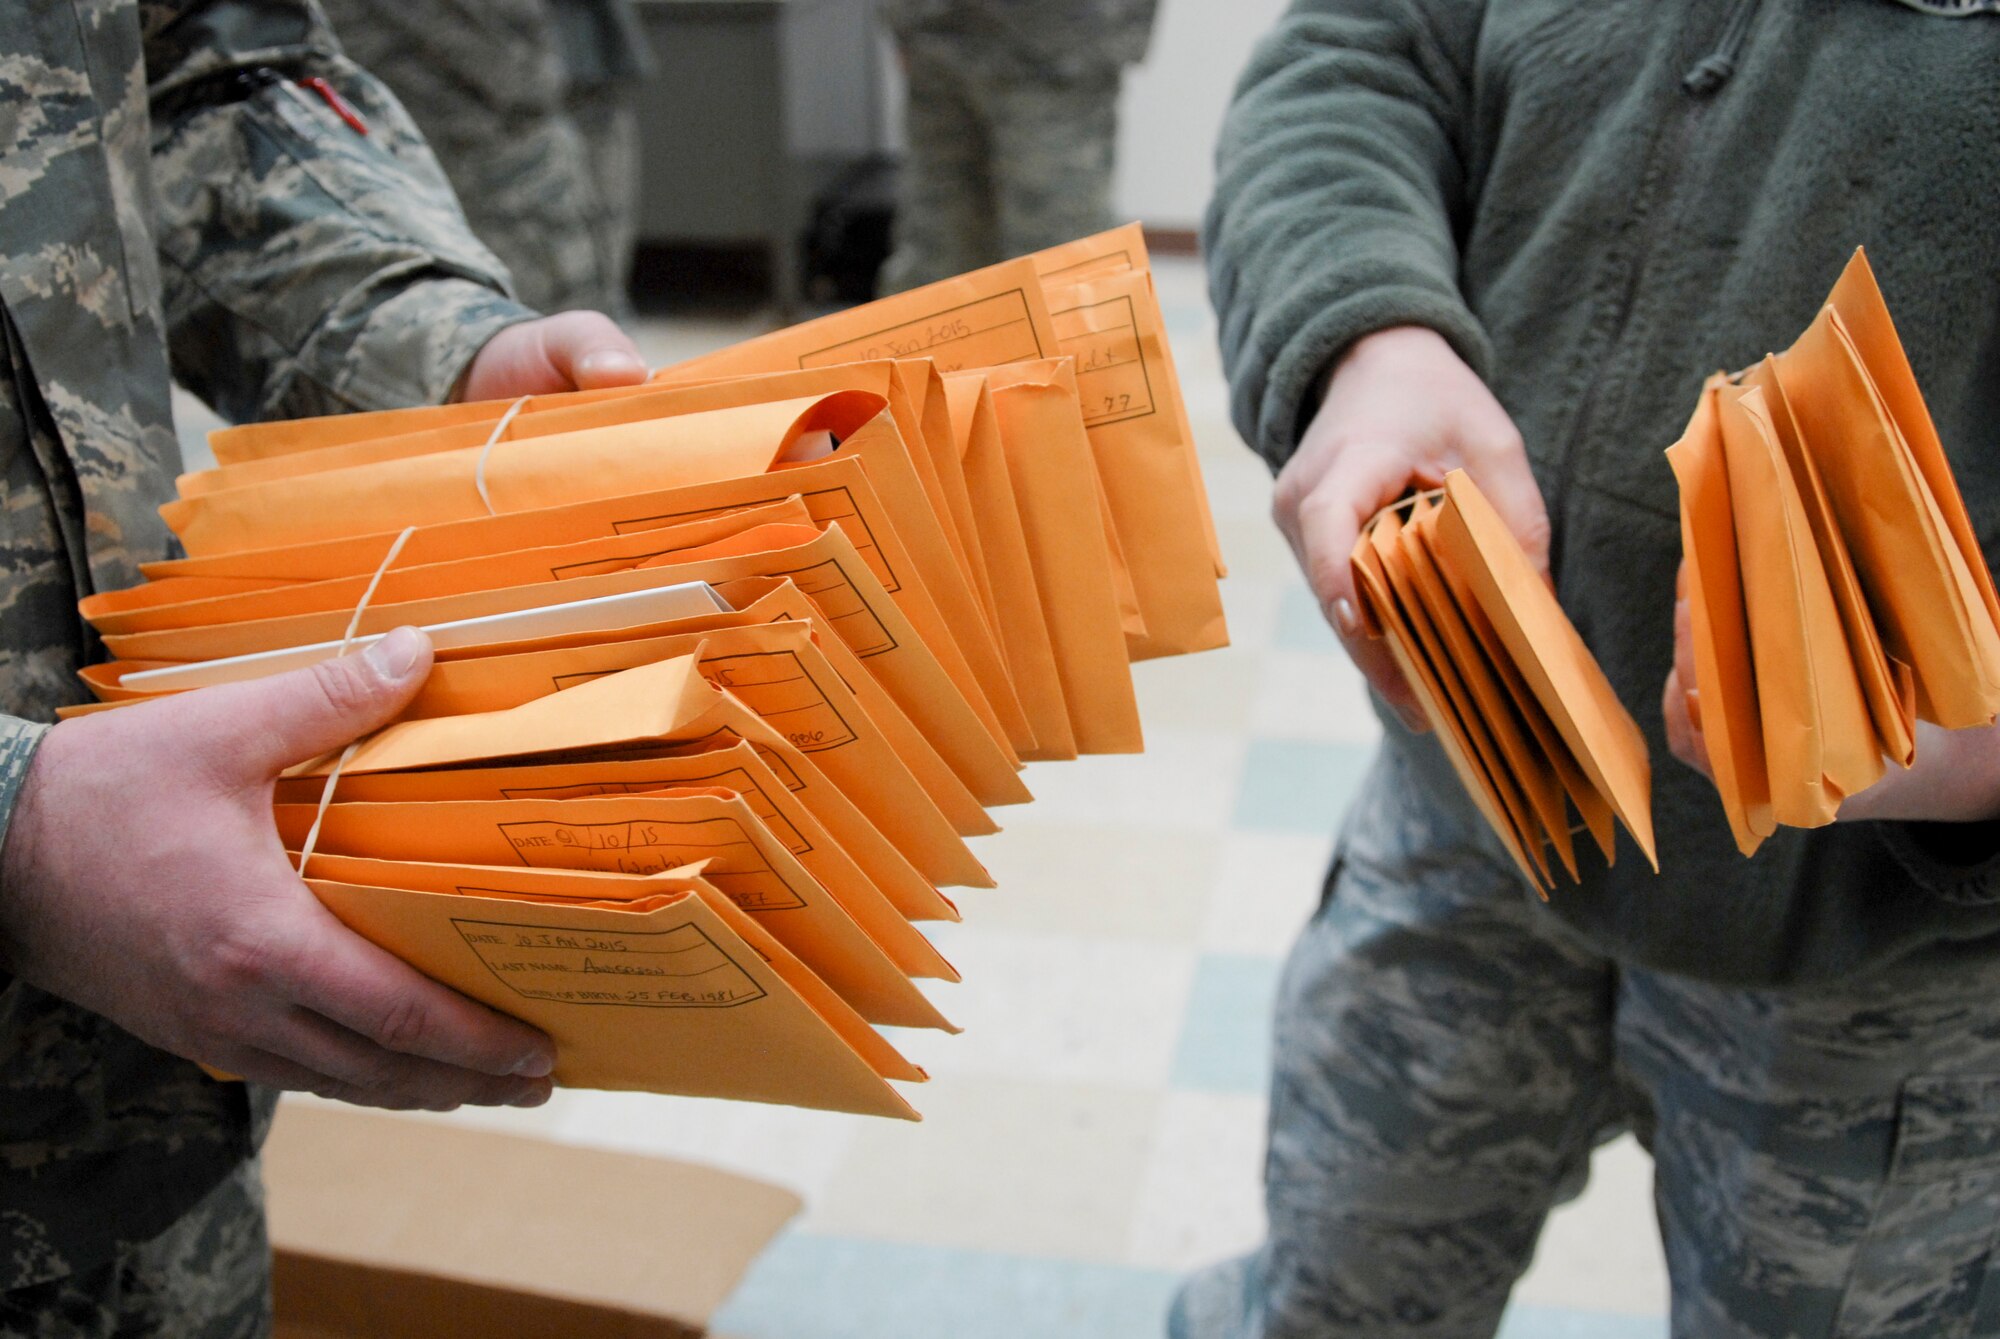 U.S. Air Force Airmen from the 180th Fighter Wing prepare over 30-plus registration packages to send to Salute to Life Program to join the national registry of volunteer bone marrow donors during the wing's two-day bone marrow registration drive Jan. 10 2015. The Airmen volunteered to complete consent forms and a swab of the inside of their cheek as part of the Salute to Life Program. The Salute to Life Program, also known as the C.W. Bill Young/Department of Defense Marrow Donor Program, works with active duty and their dependents, guard, reservist and Department of Defense civilian employees to facilitate marrow and stem cell donations. All of the donors are volunteers and since the program inception in 1991, more than 750,000 individuals to fight against blood cancer and other fatal diseases.  Air National Guard photo by Senior Master Sgt. Beth Holliker (Released)